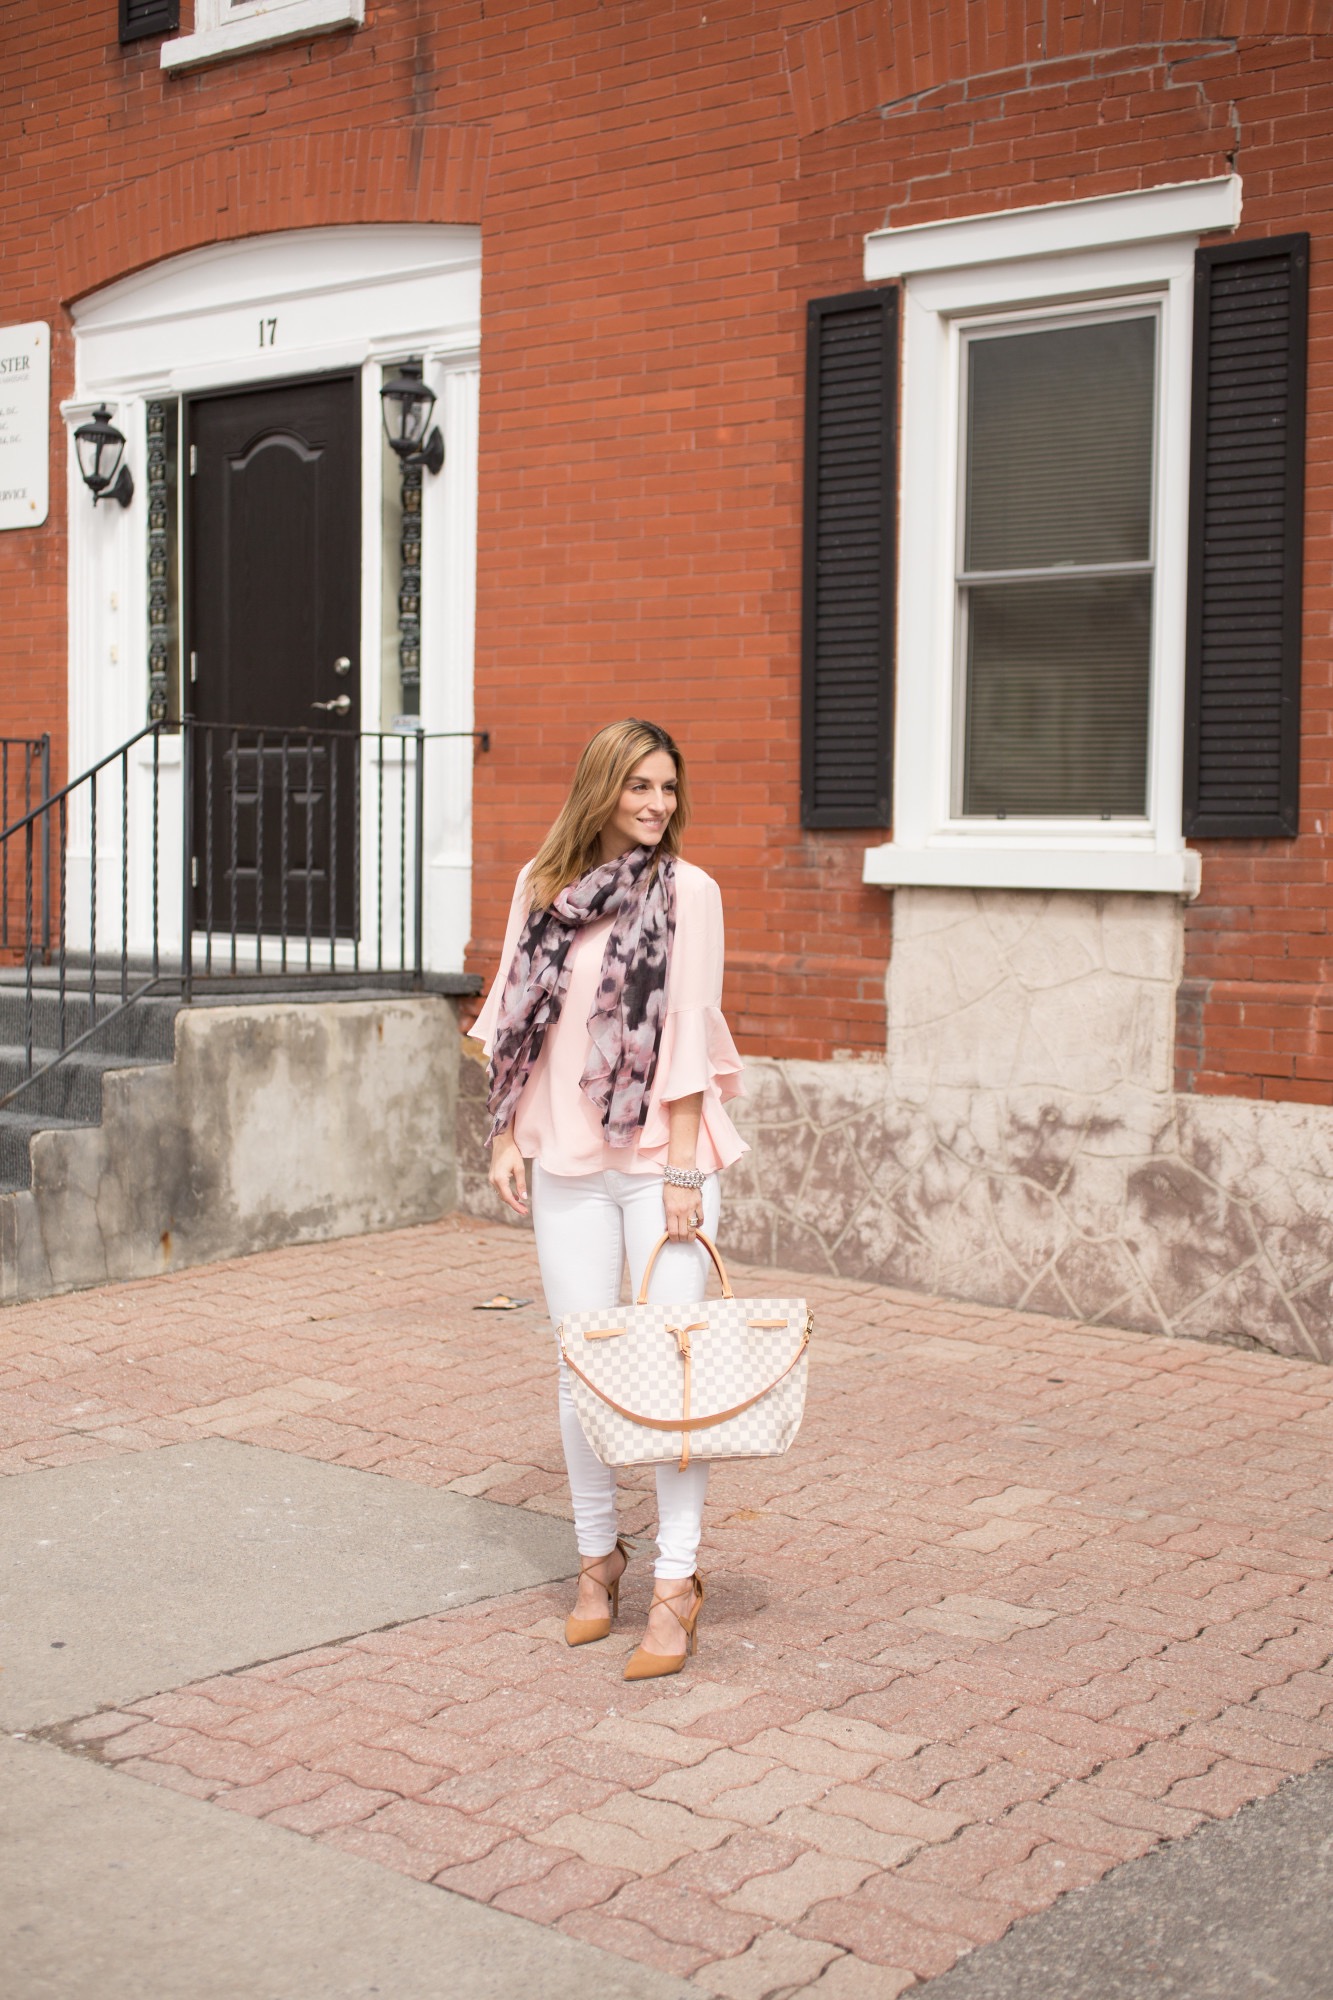 Sparkleshinylove Pink bell sleeve top Suzy Shier, multicolour scarf Suzy shier, White Jeans Suzy Shier, Louis Vuitton Girolata Bag, lace up pointed toe heels in nude Le Chateau